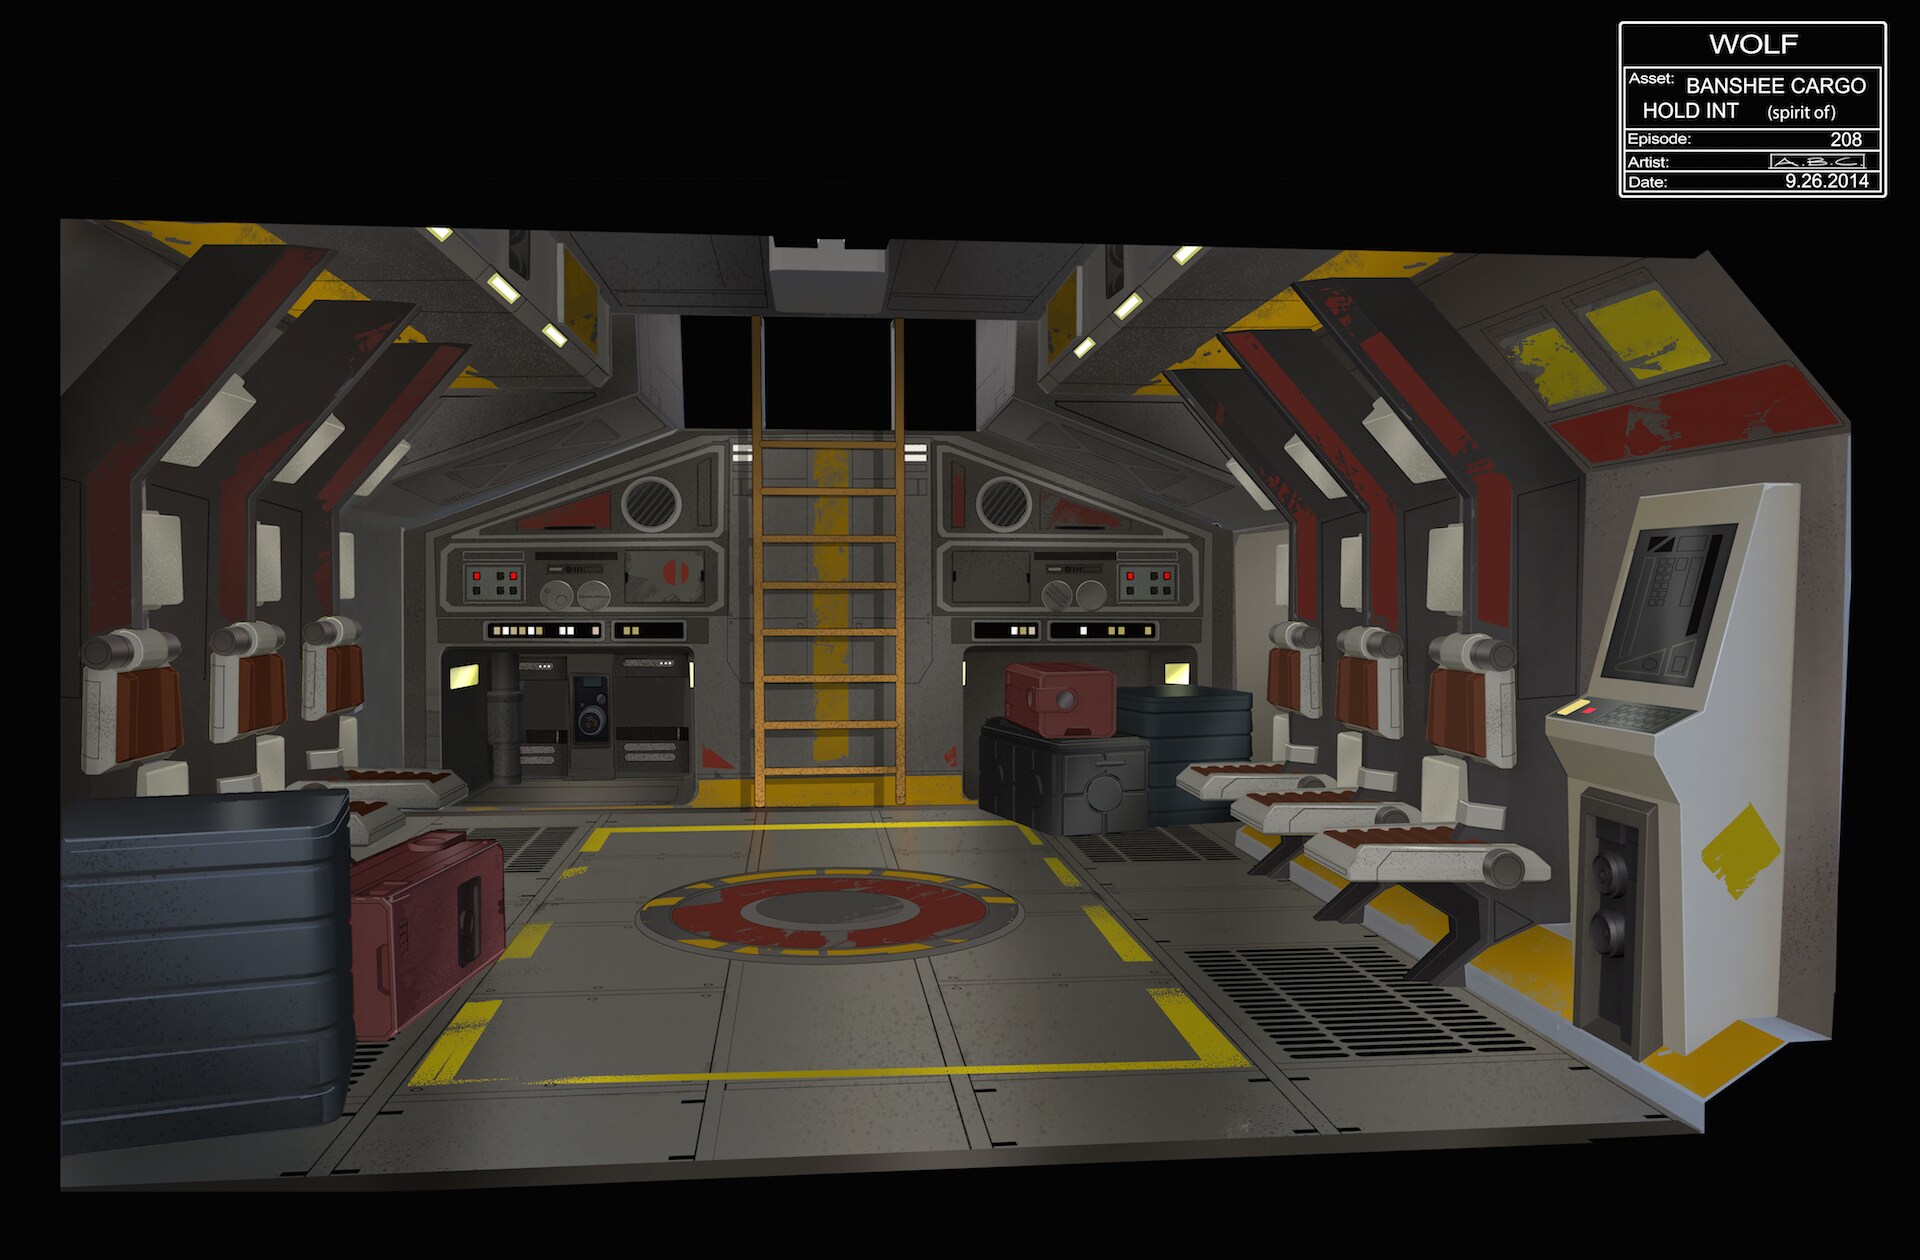 Banshee (Shadow Caster) cargo hold interior sketch by Amy Beth Christenson. 